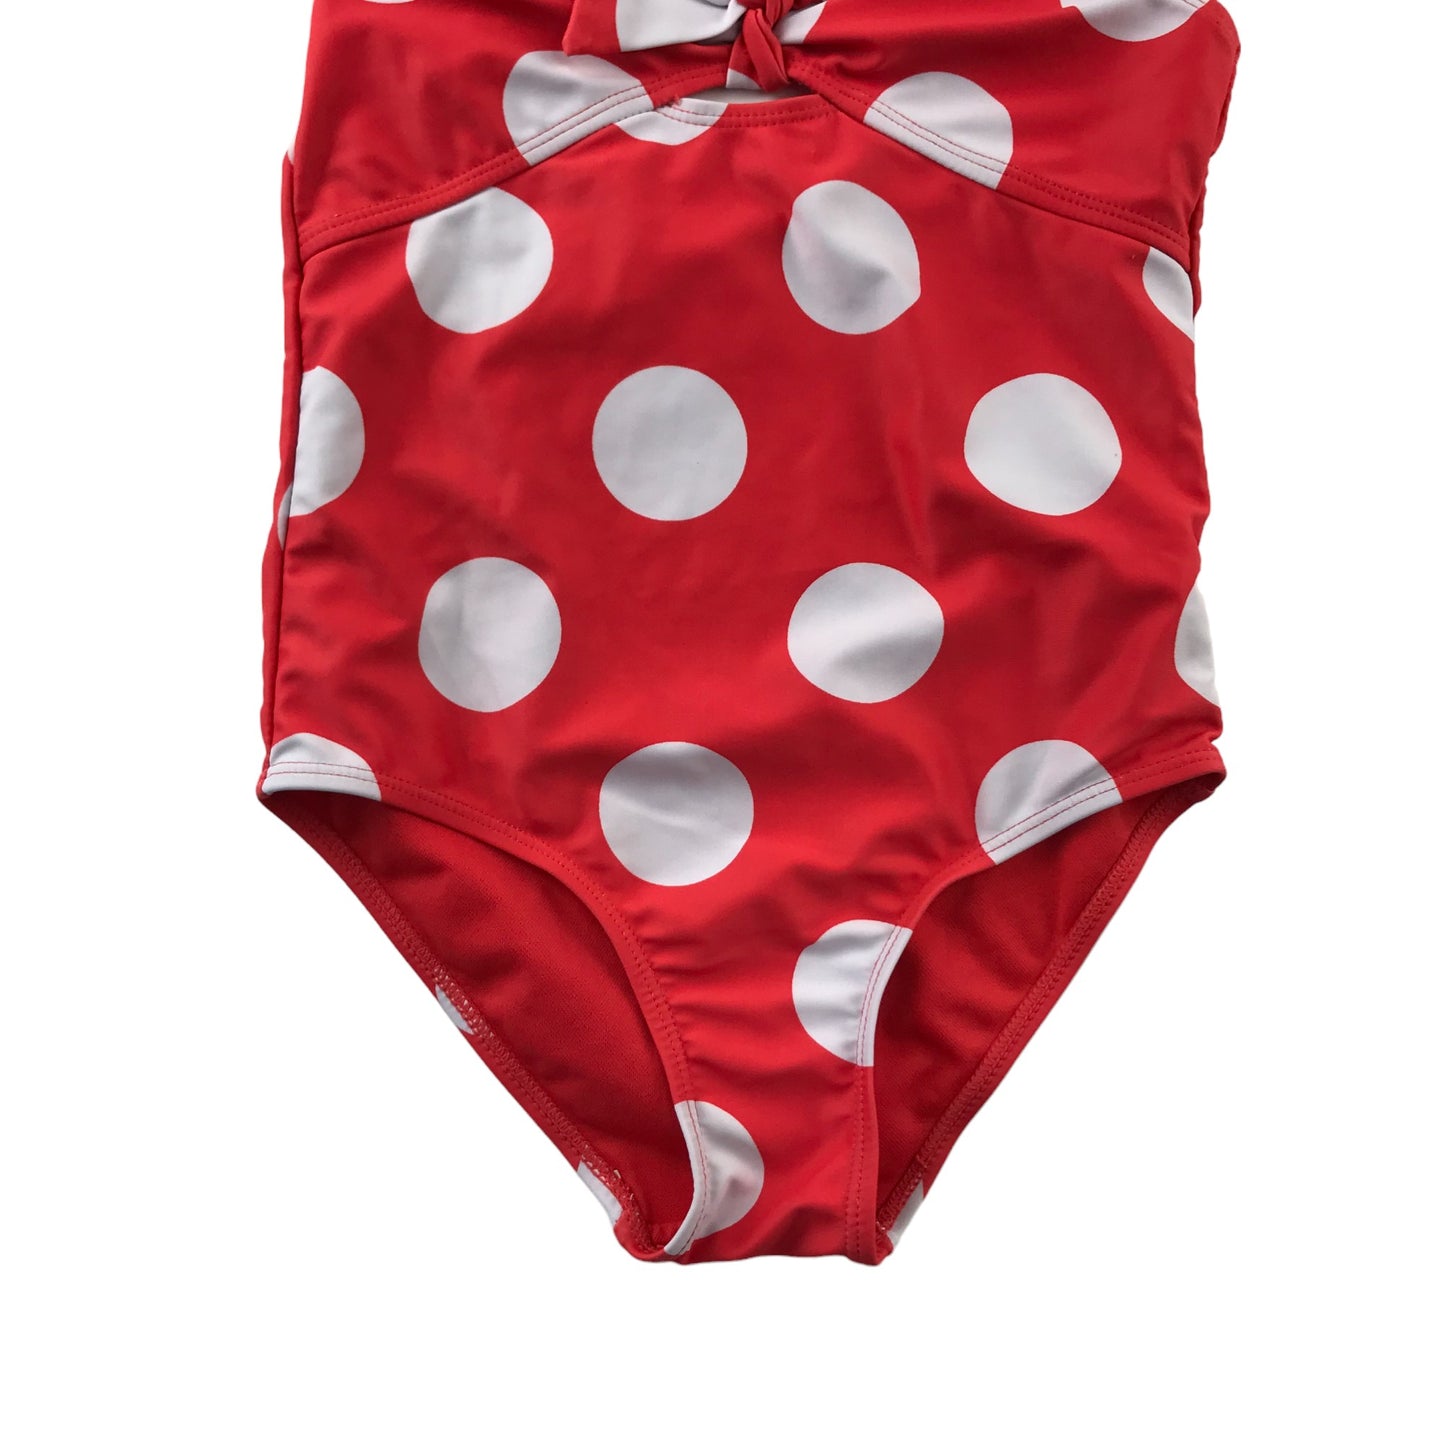 Tu Swimsuit Age 8 Red and White Polka Dot One Piece Cossie